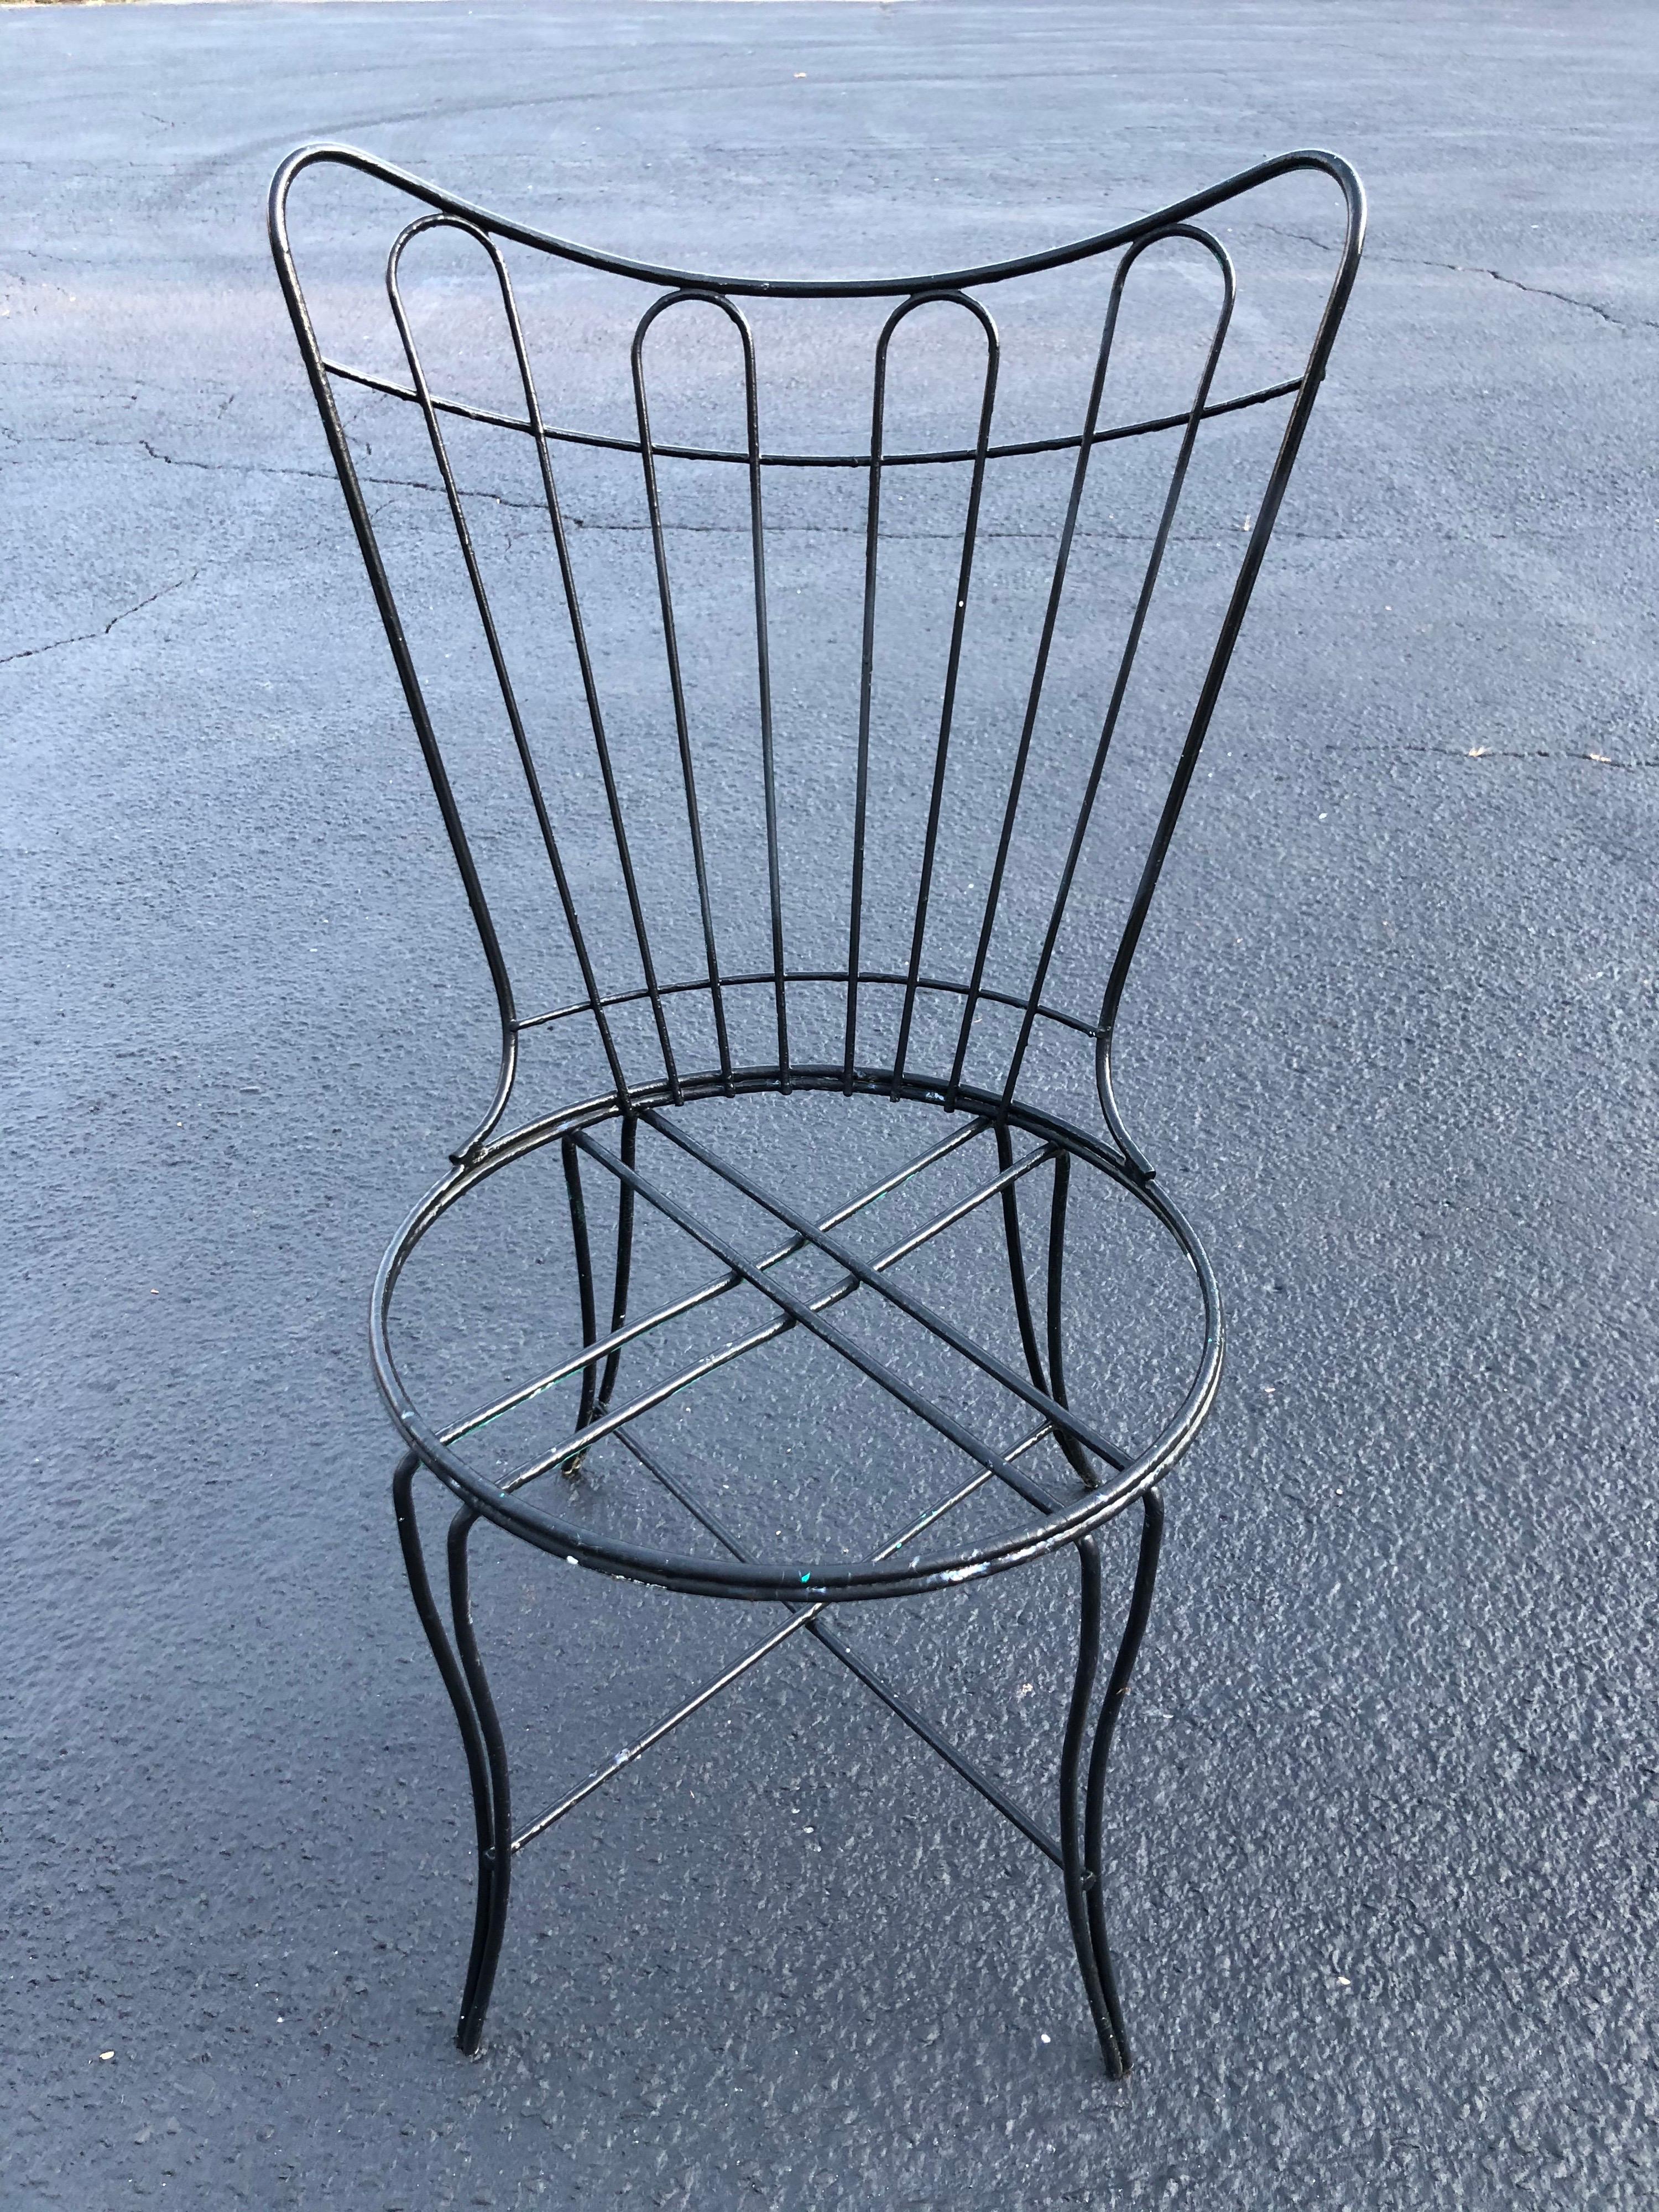 Mid-Century Modern outdoor patio chair by Homecrest. Black iron attributed to John Salterini for Woodard. Needs a cushion. Seat height without cushion 16.50